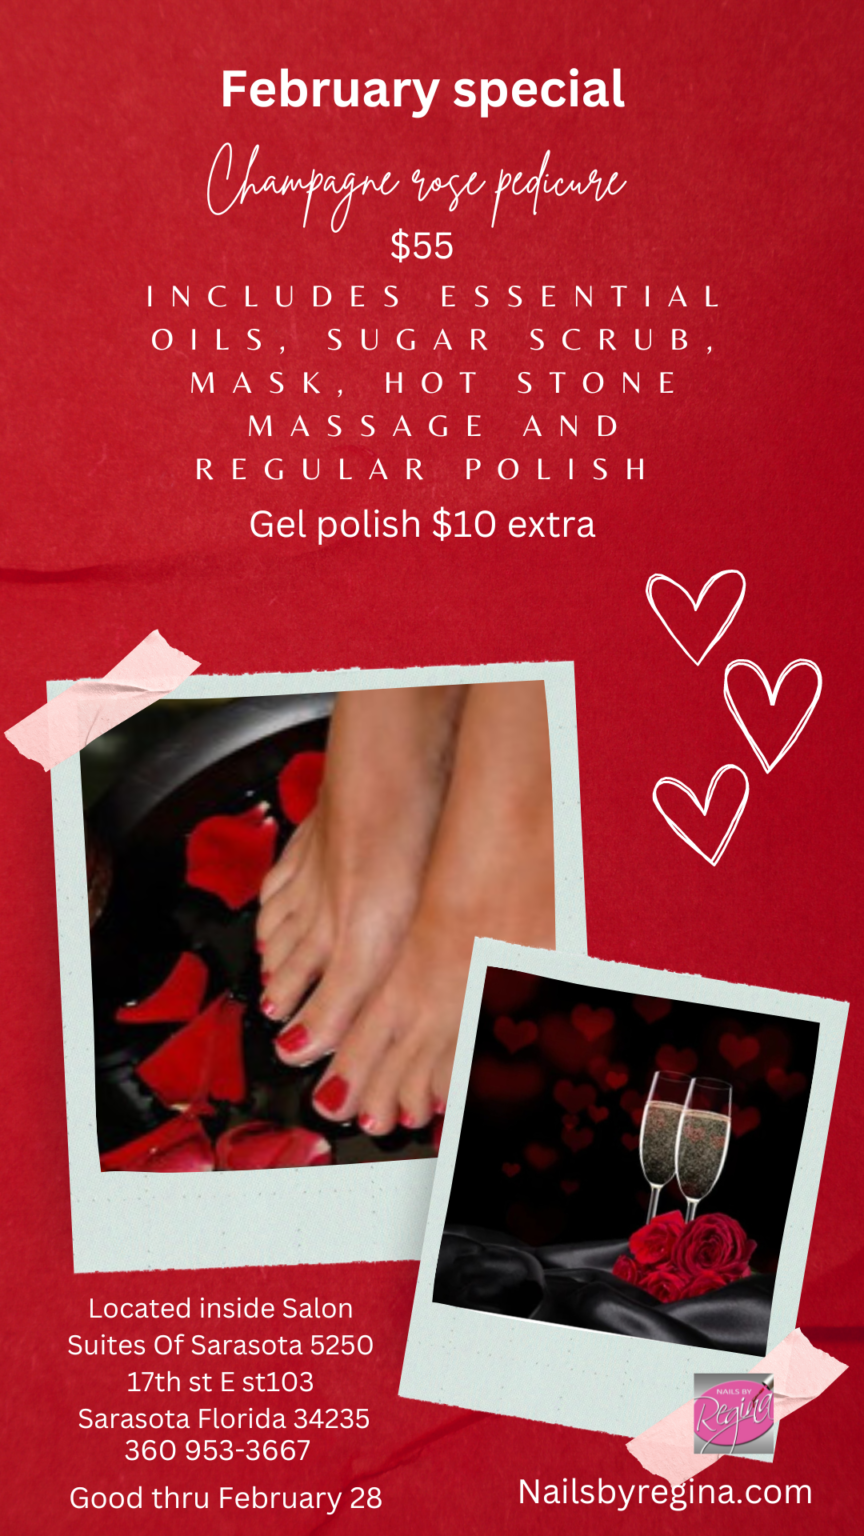 Nails by regina February pedicure special